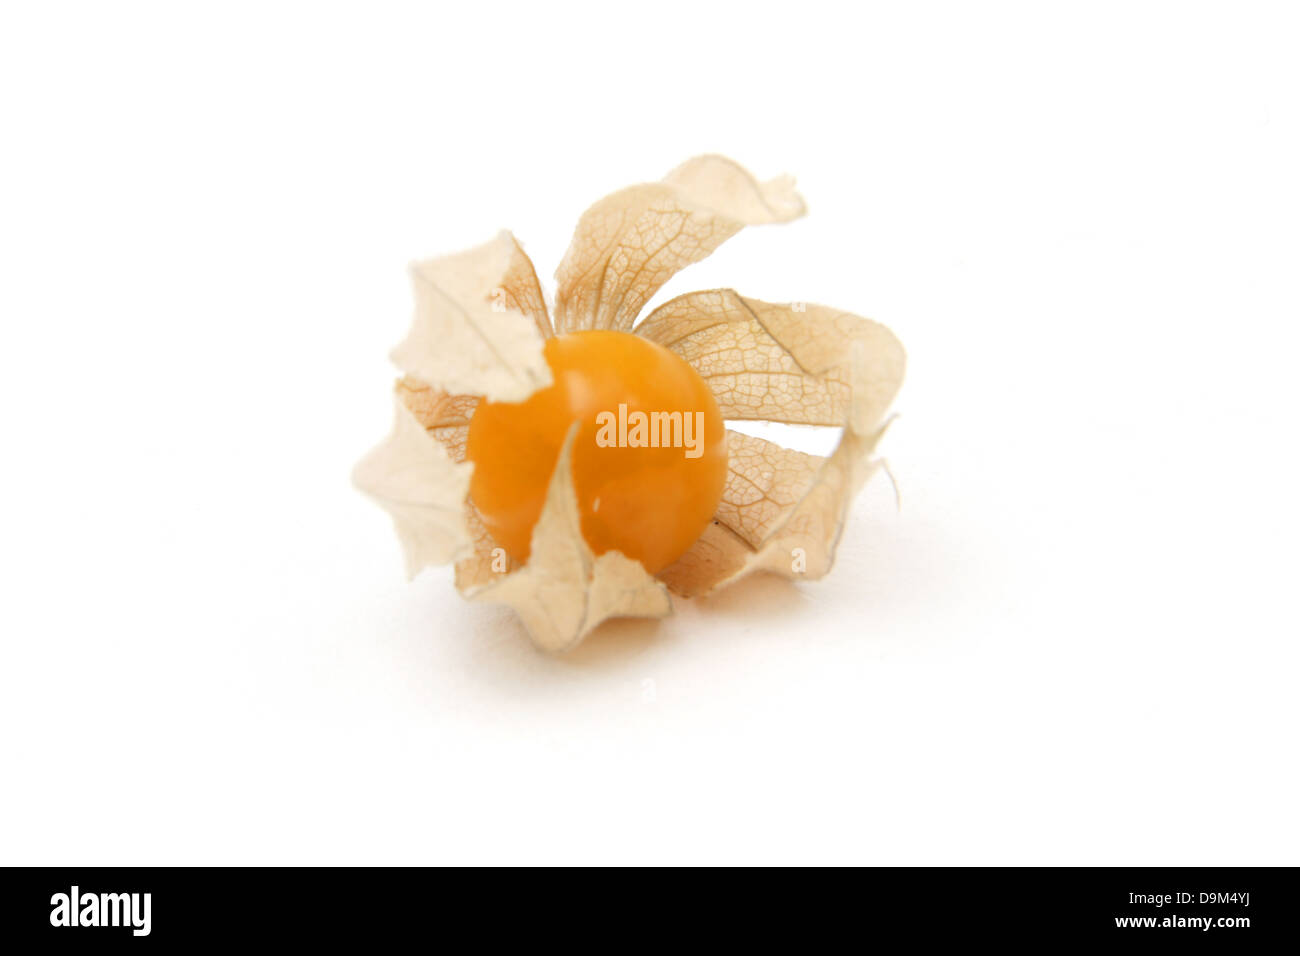 A Ripe Cape Gooseberry (Physalis Peruviana) In Calyx From The Nightshade Family Stock Photo